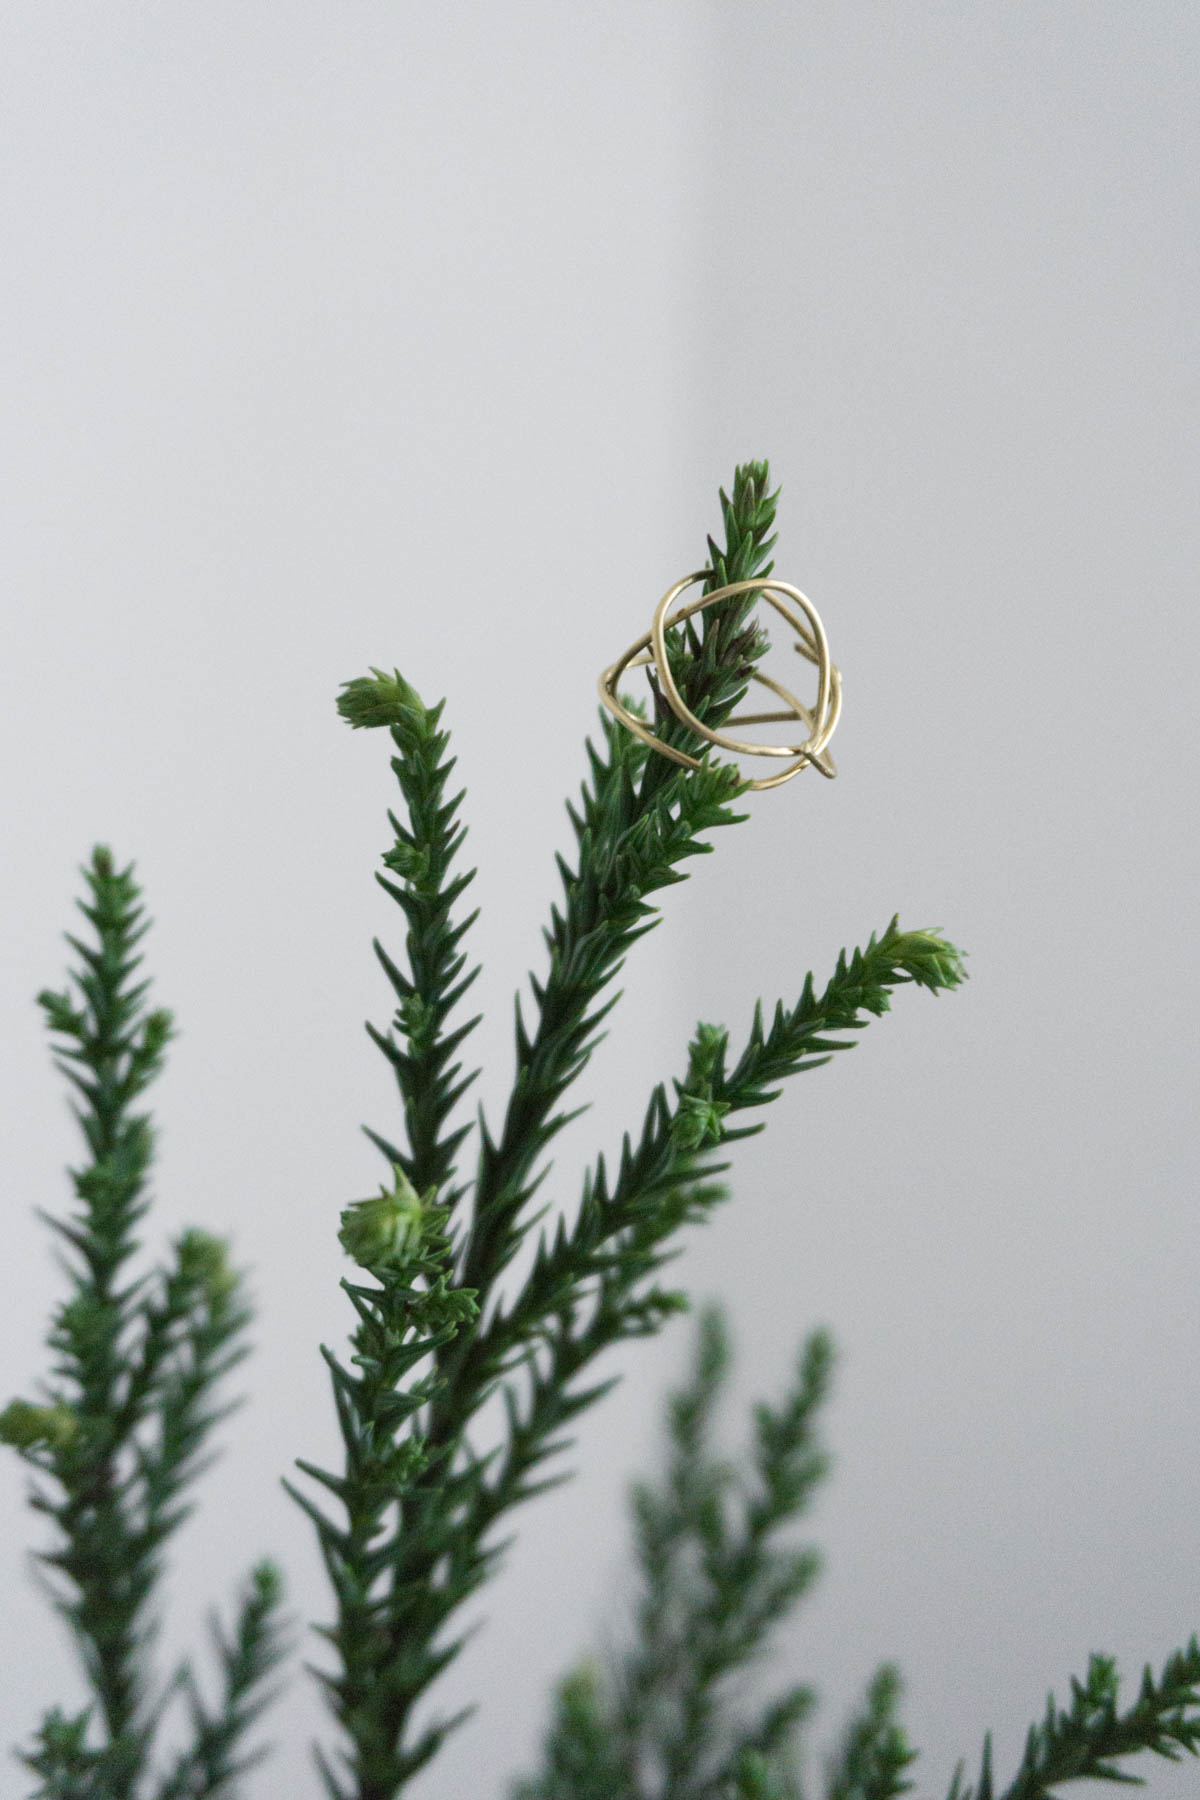 Cozy Minimal Kitchen, Scandinavian Christmas Decor, Evergreen and Wire - RG Daily Blog